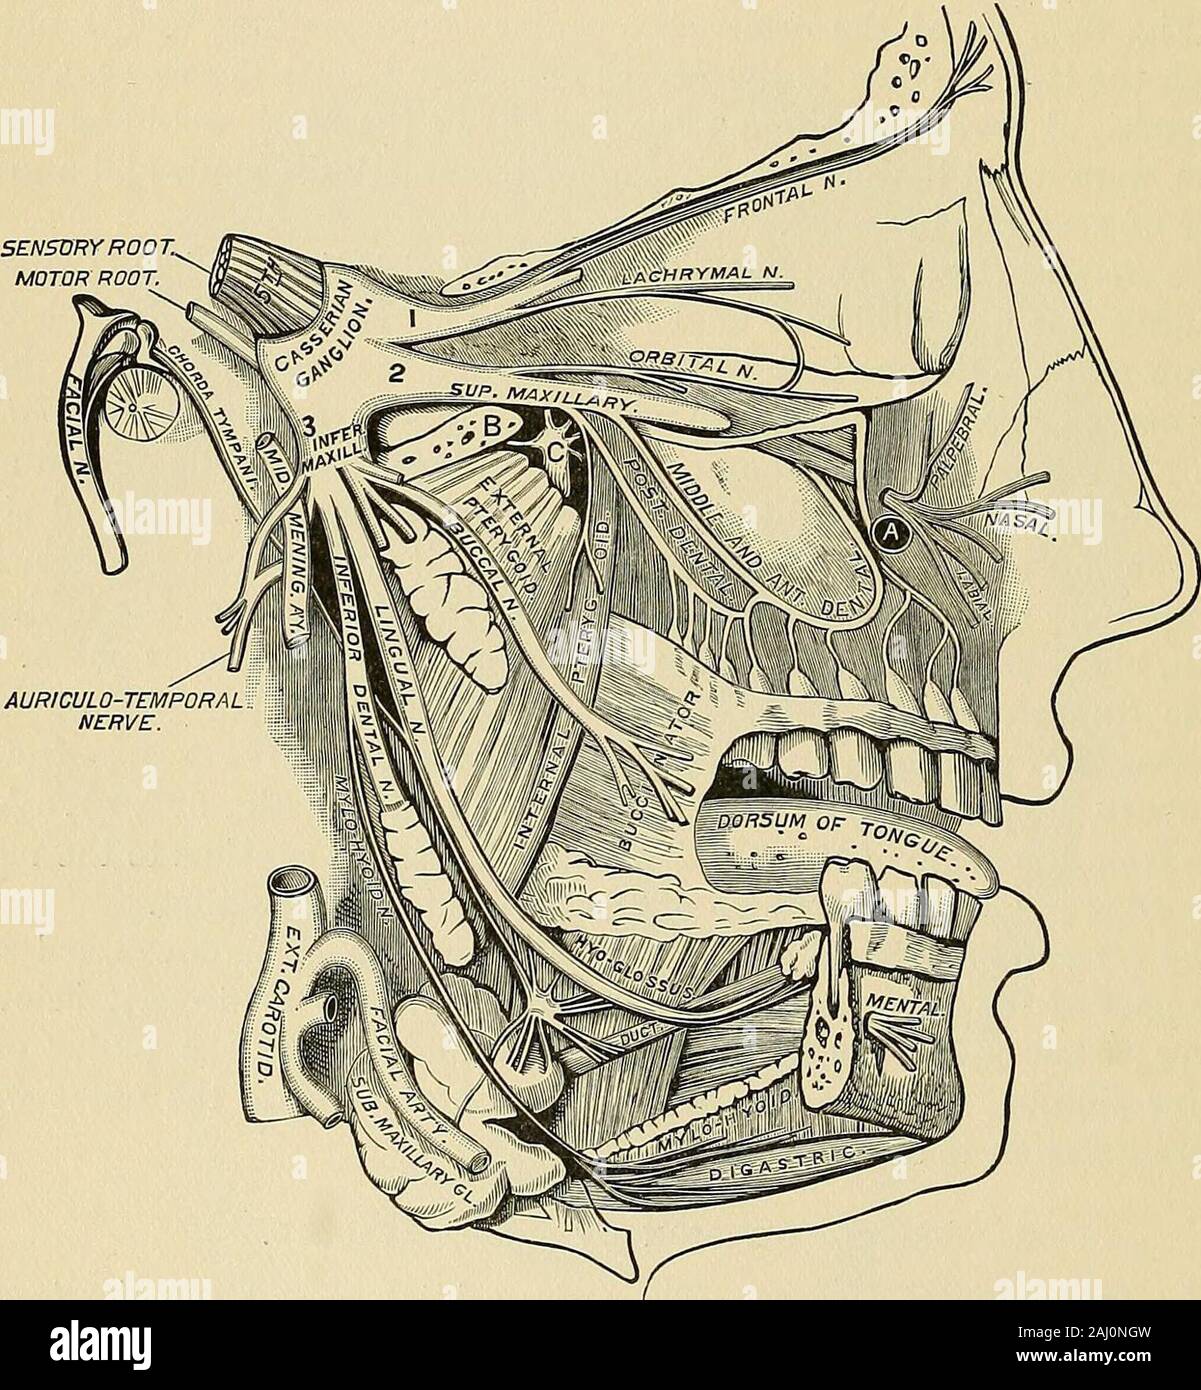 Operative surgery . e infra-orbital fora-men and placing the finger upon it. Then turn up the cheek and make anarrow incision, beginning at the fold of the cheek and maxilla, and carry itupward in the line of the foramen until within a short distance of it, when20 278 OPERATIVE SURGERY. the nerves are divided with a sharp-pointed scissors as they appear at theopening. The nerves can be exposed through an incision made as follows:The Operation.—Make an incision with the convexity downward at thelower margin of the orbit, with the center at the infra-orbital foramen (Fig.308, a). Divide the orbi Stock Photo